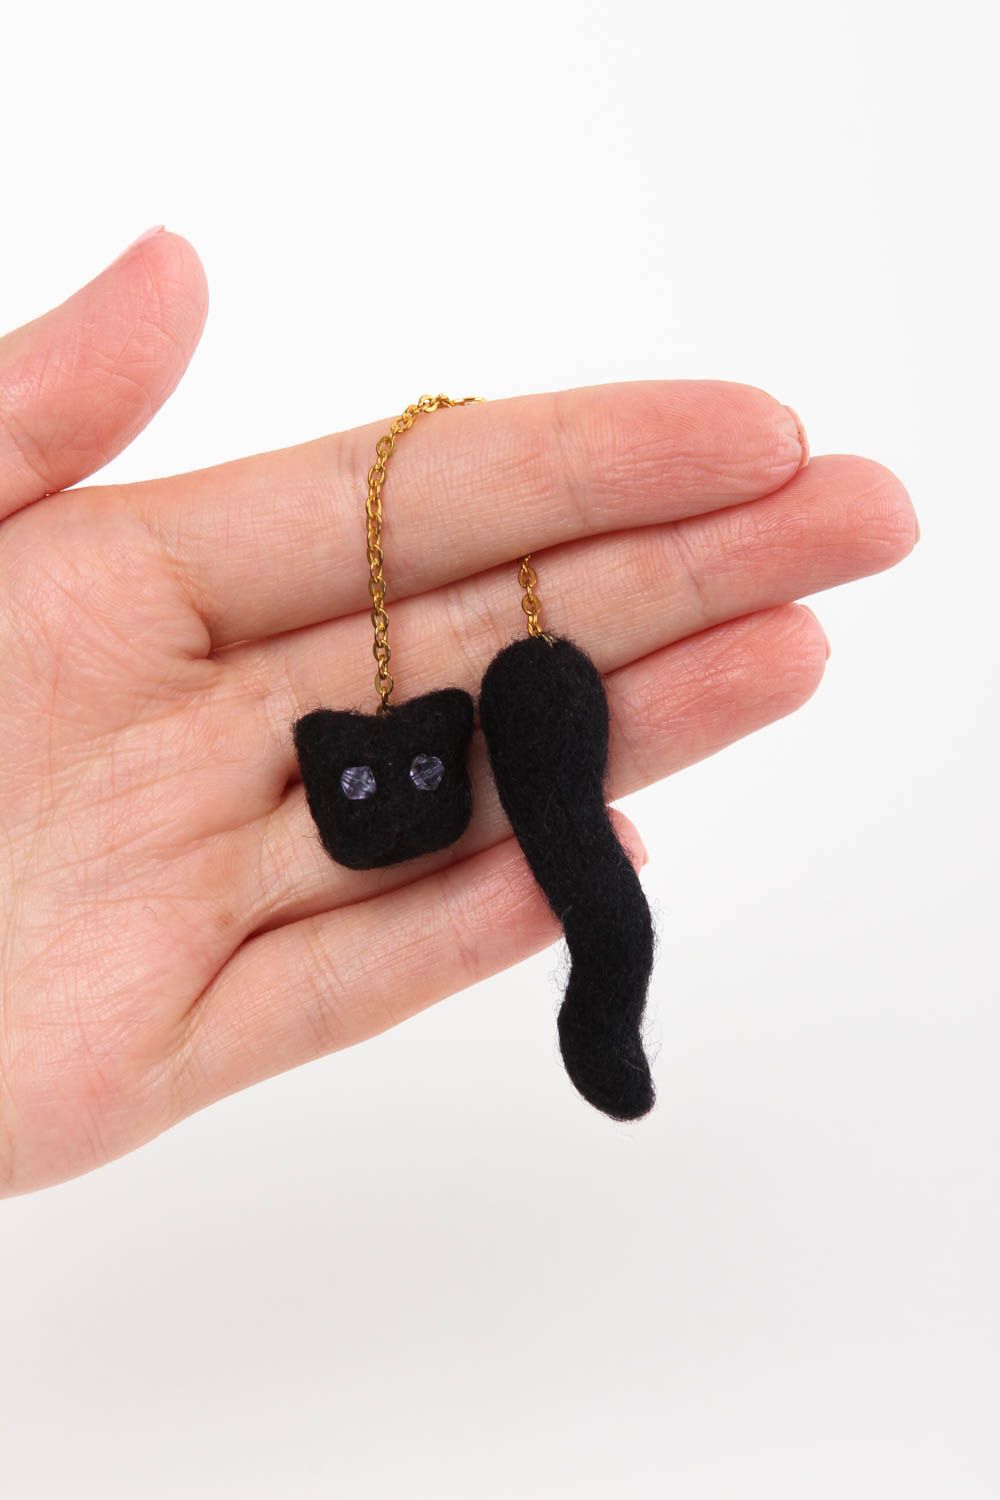 Handmade woolen necklace cat necklace fashion jewelry accessories for girls photo 4